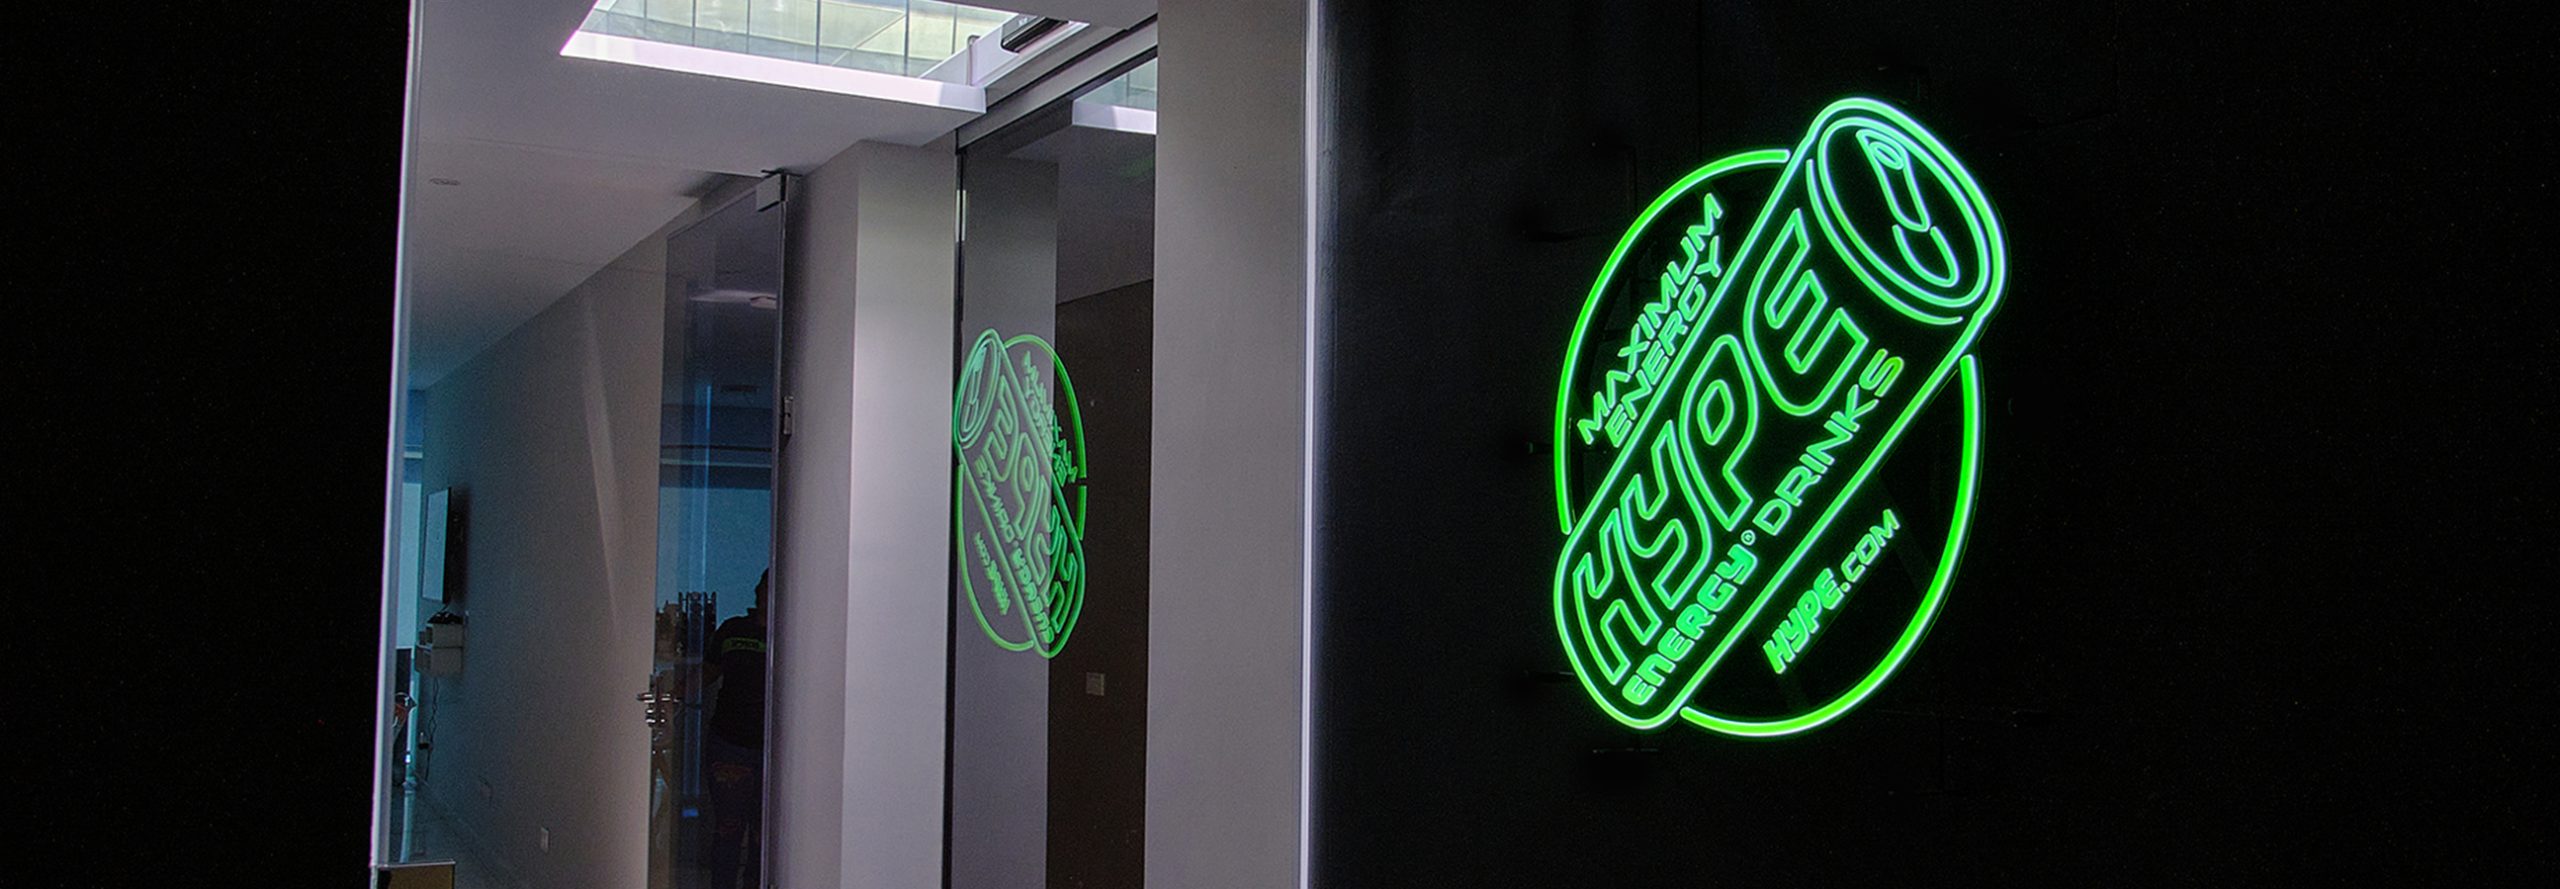 Lighting Hype Energy Drink logo in green on the black wall.